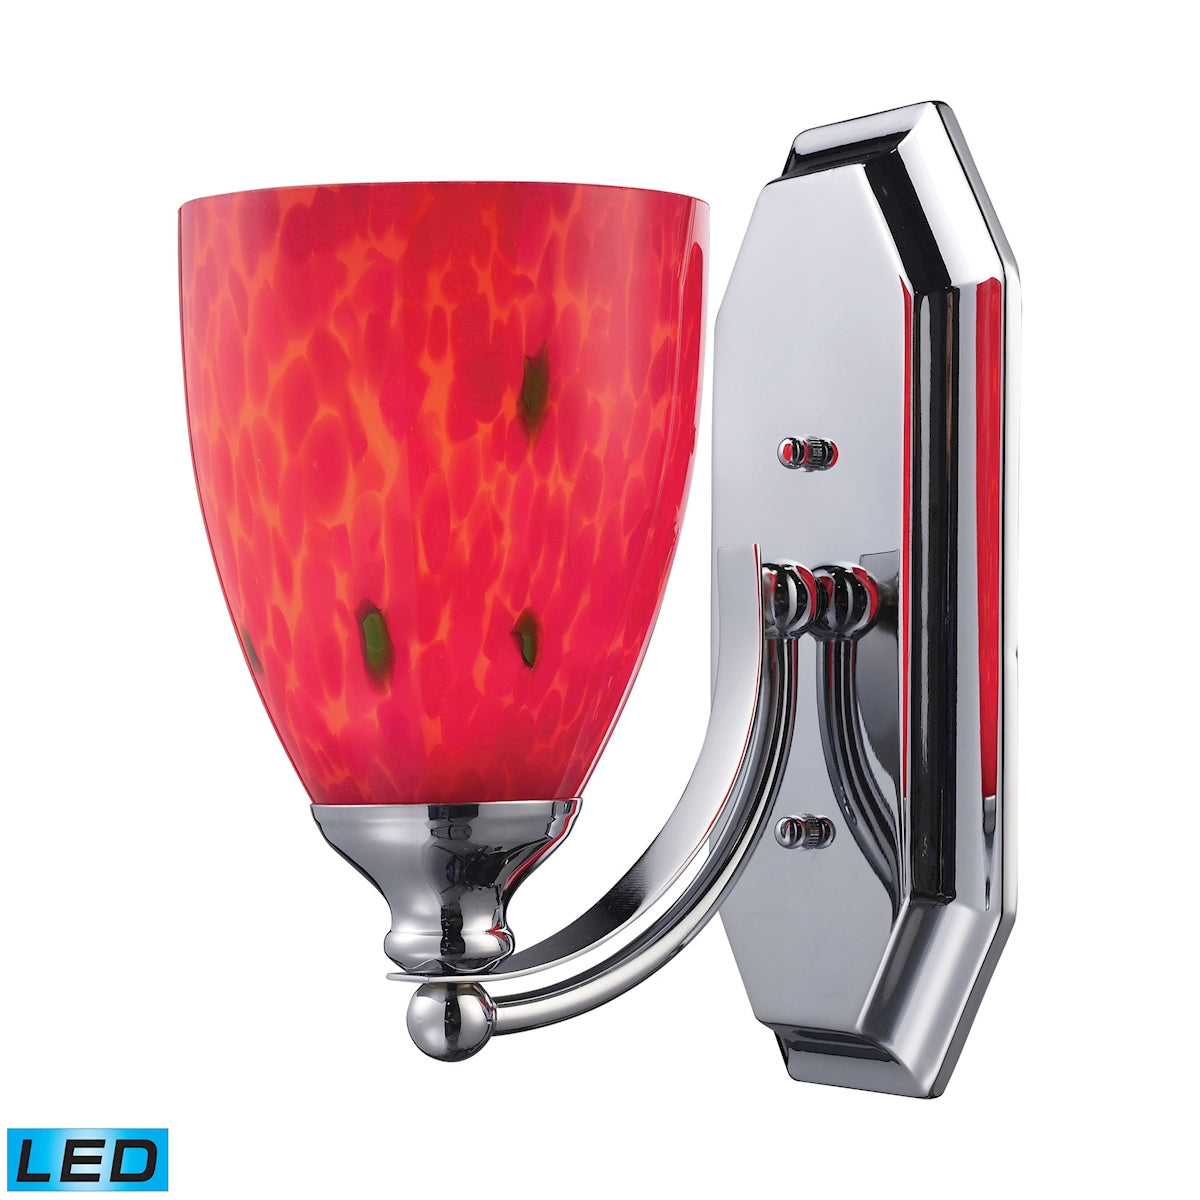 ELK Lighting 570-1C-FR-LED Mix and Match Vanity 1-Light Wall Lamp in Chrome with Fire Red Glass - Includes LED Bulb